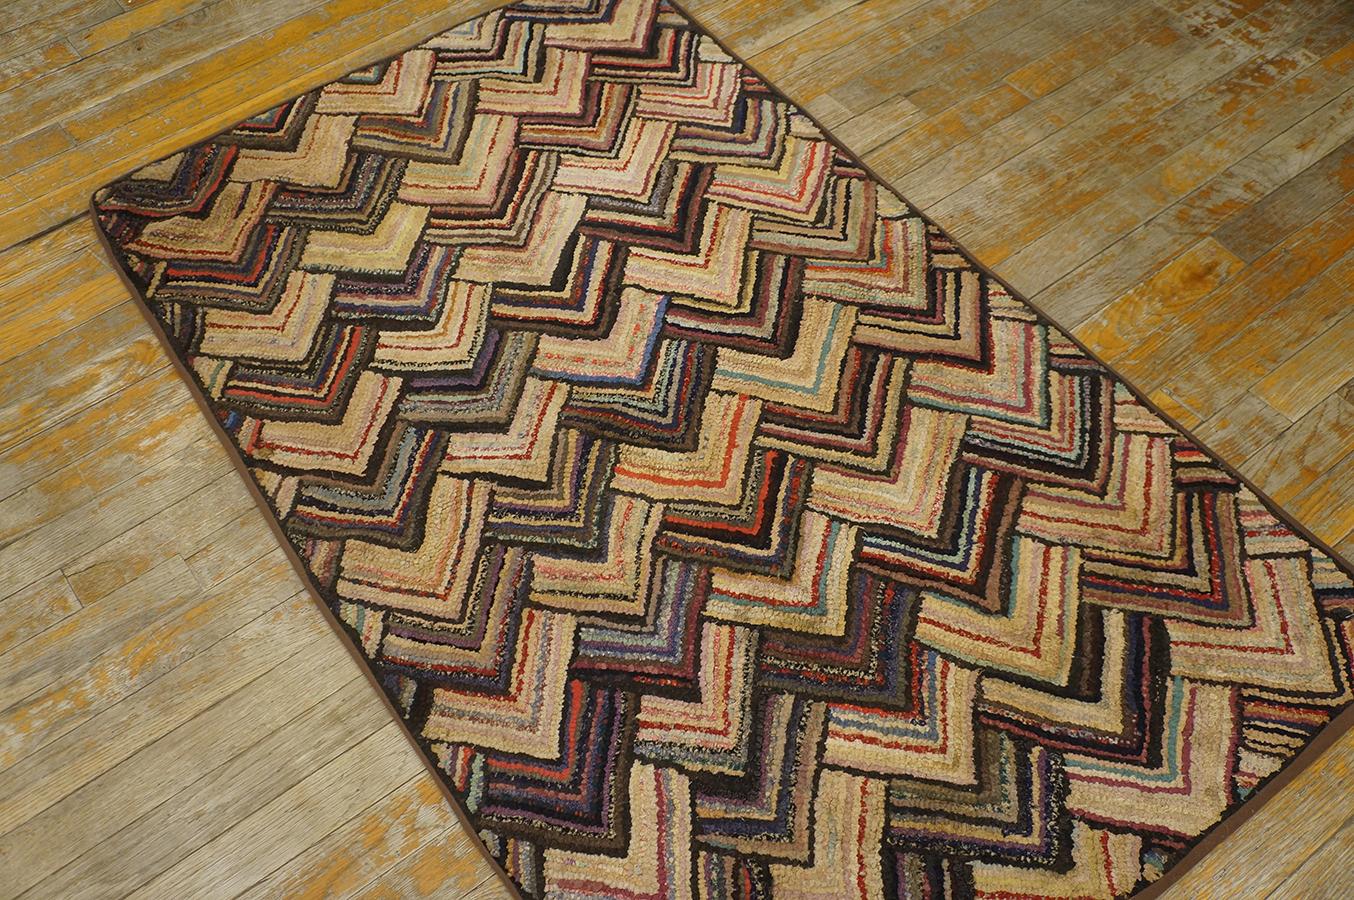 Antique hand-woven American Hooked rug. Multi color layering yet unique color pattern. Brown border. Well maintained circa 1920. Measured 2' 7'' x 4' 6''.